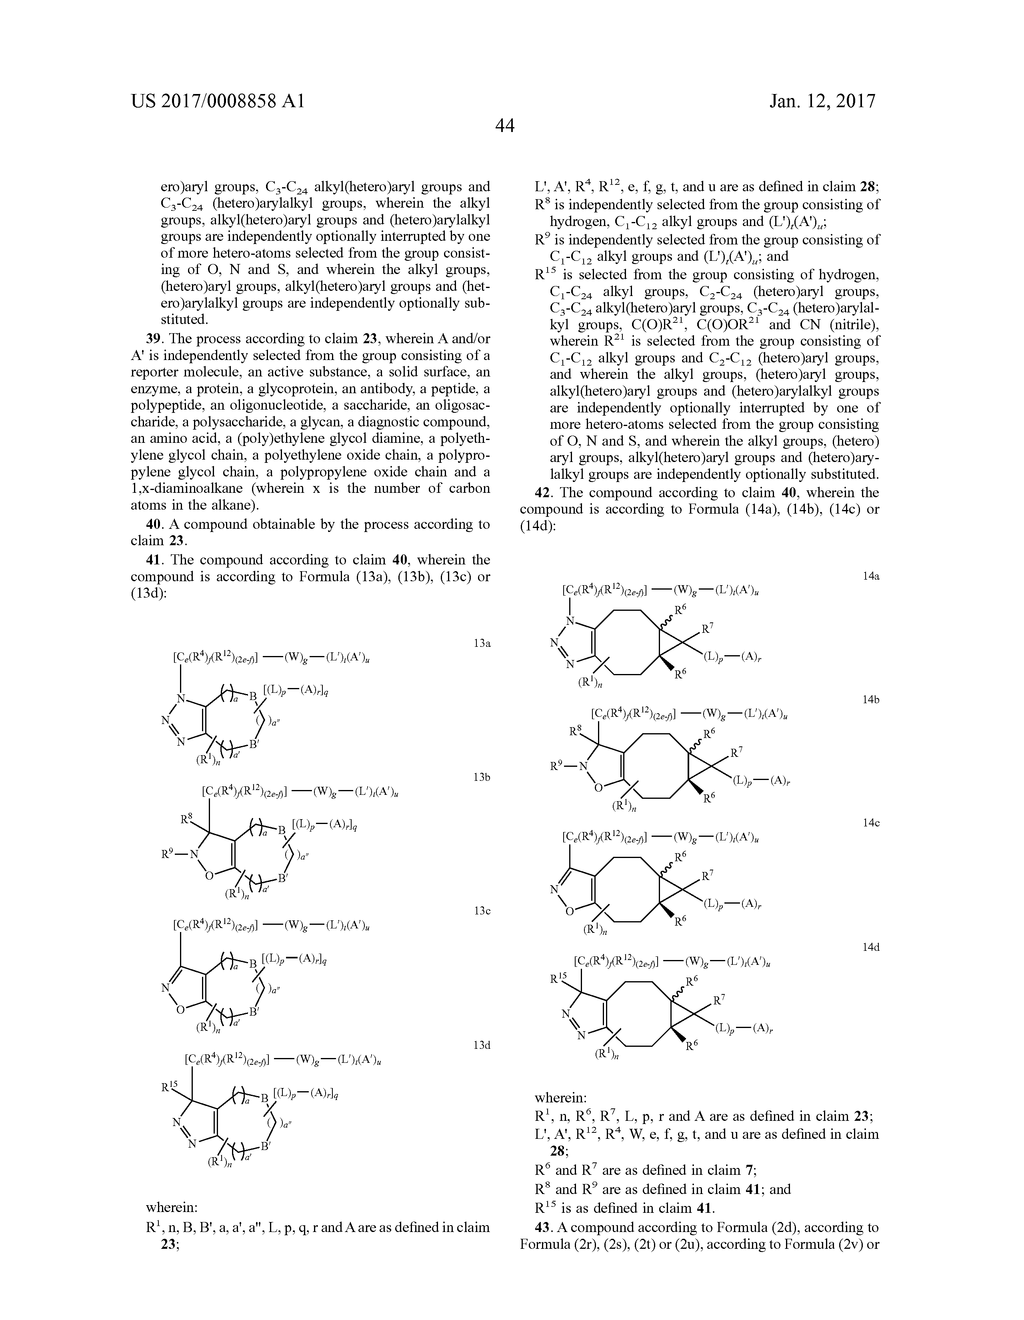 PROCESS FOR THE CYCLOADDITION OF A HALOGENATED 1,3-DIPOLE COMPOUND WITH A     (HETERO)CYCLOALKYNE - diagram, schematic, and image 54